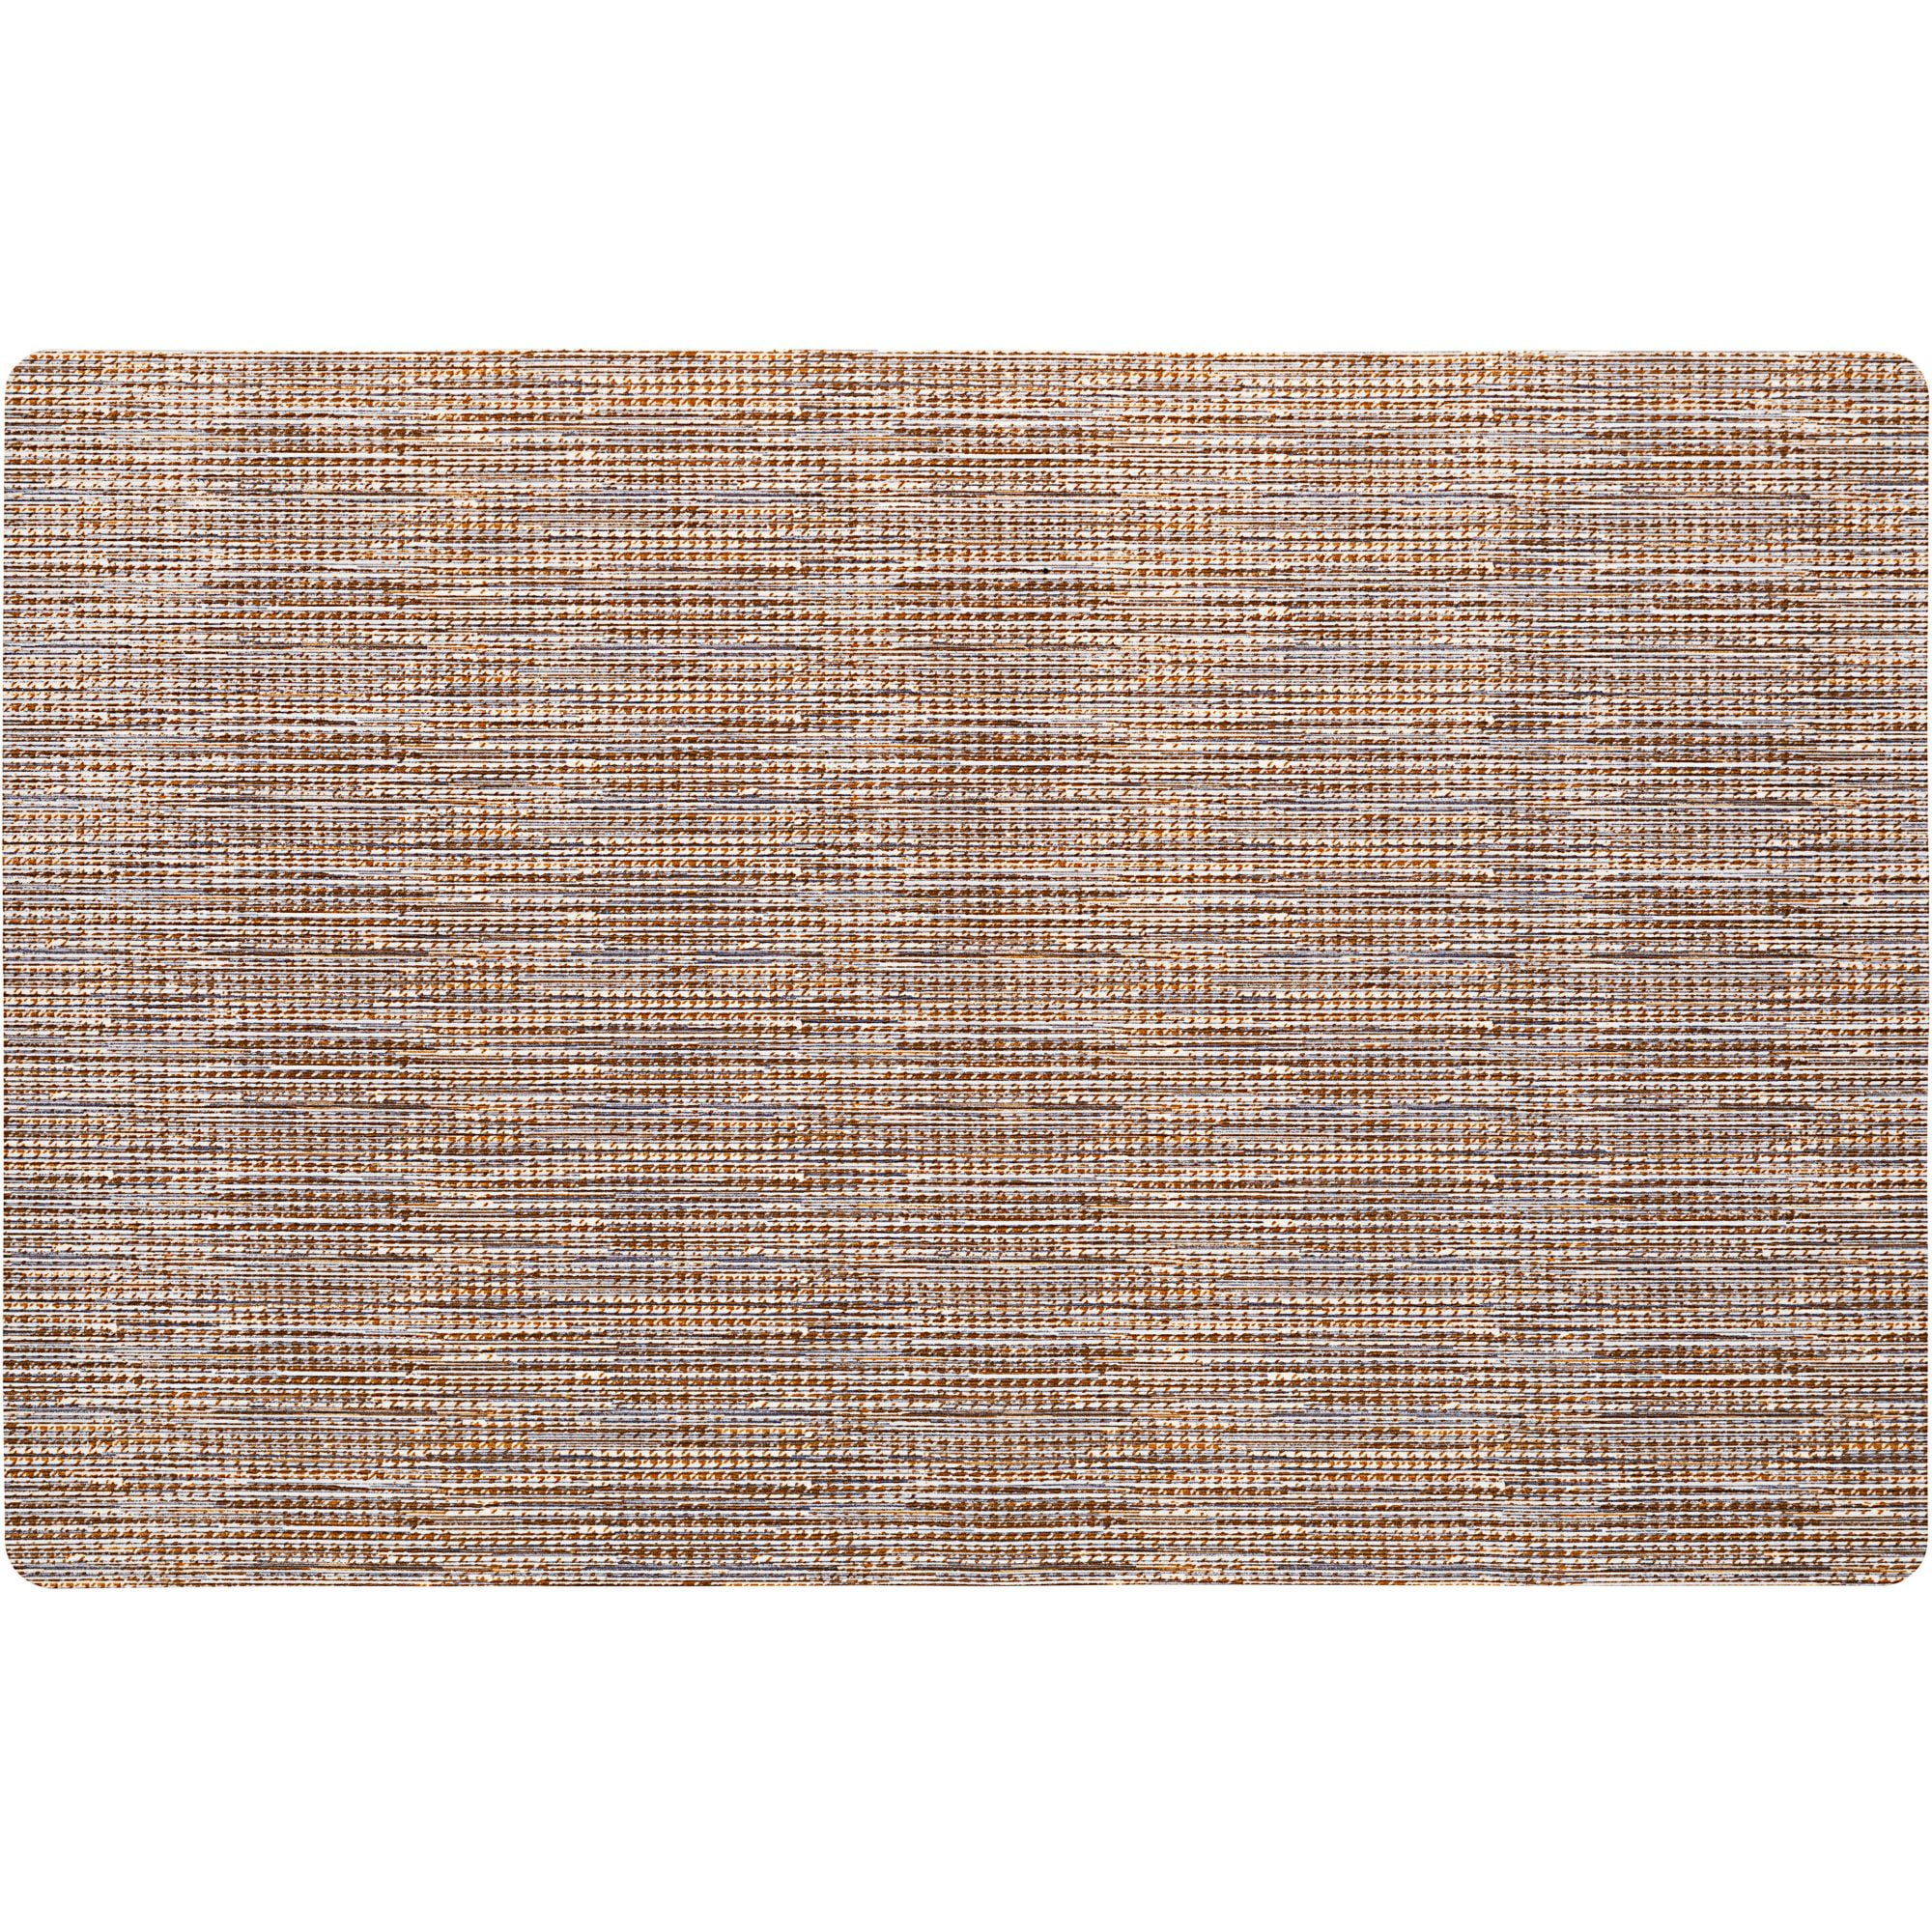 One Piece Fishbone-shaped Silica Gel Kitchen Mat With Grey Patchwork  Pattern, Light Luxurious Style, Cushioning, Anti-fatigue, And Two-sided Kitchen  Carpet. It Is A Minimalist Silica Gel & Soft Rubber Mat That Absorbs